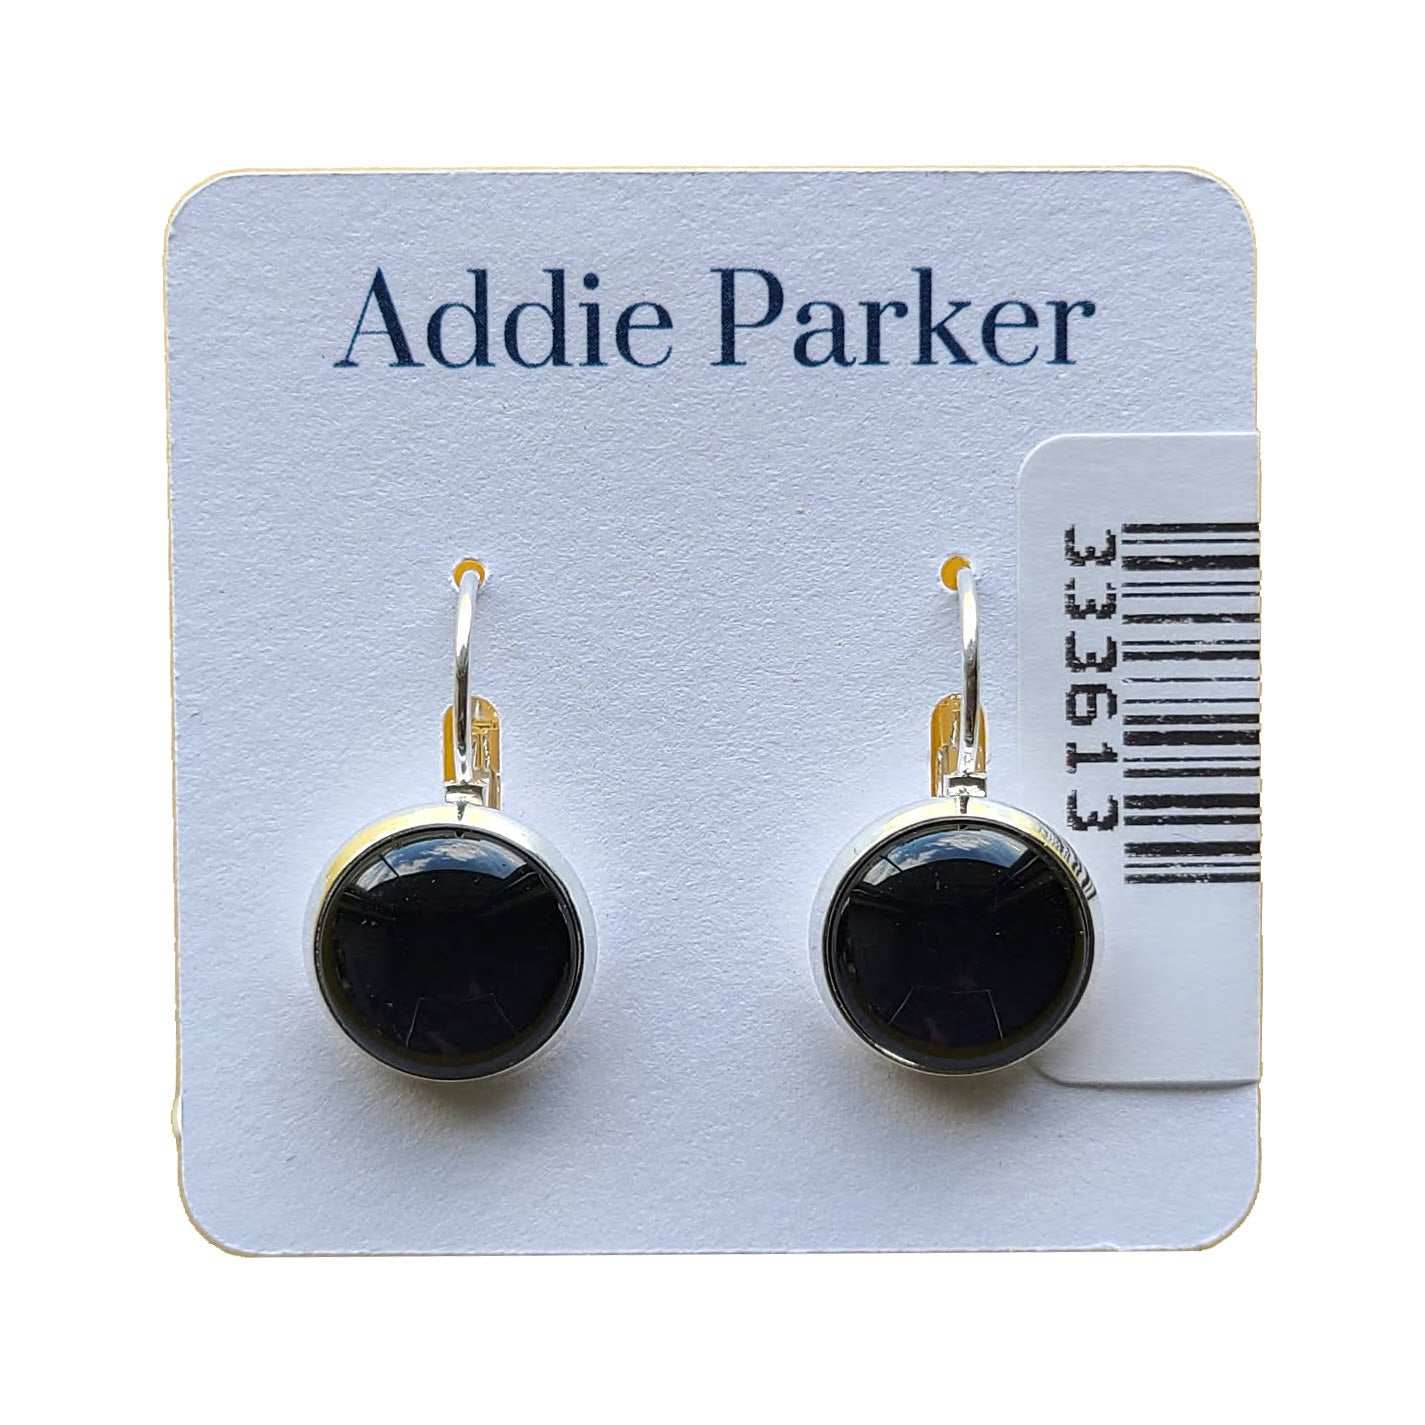 A pair of round black, nickel free Addie Parker earrings displayed on a white card with the name "Addie Parker" printed at the top.